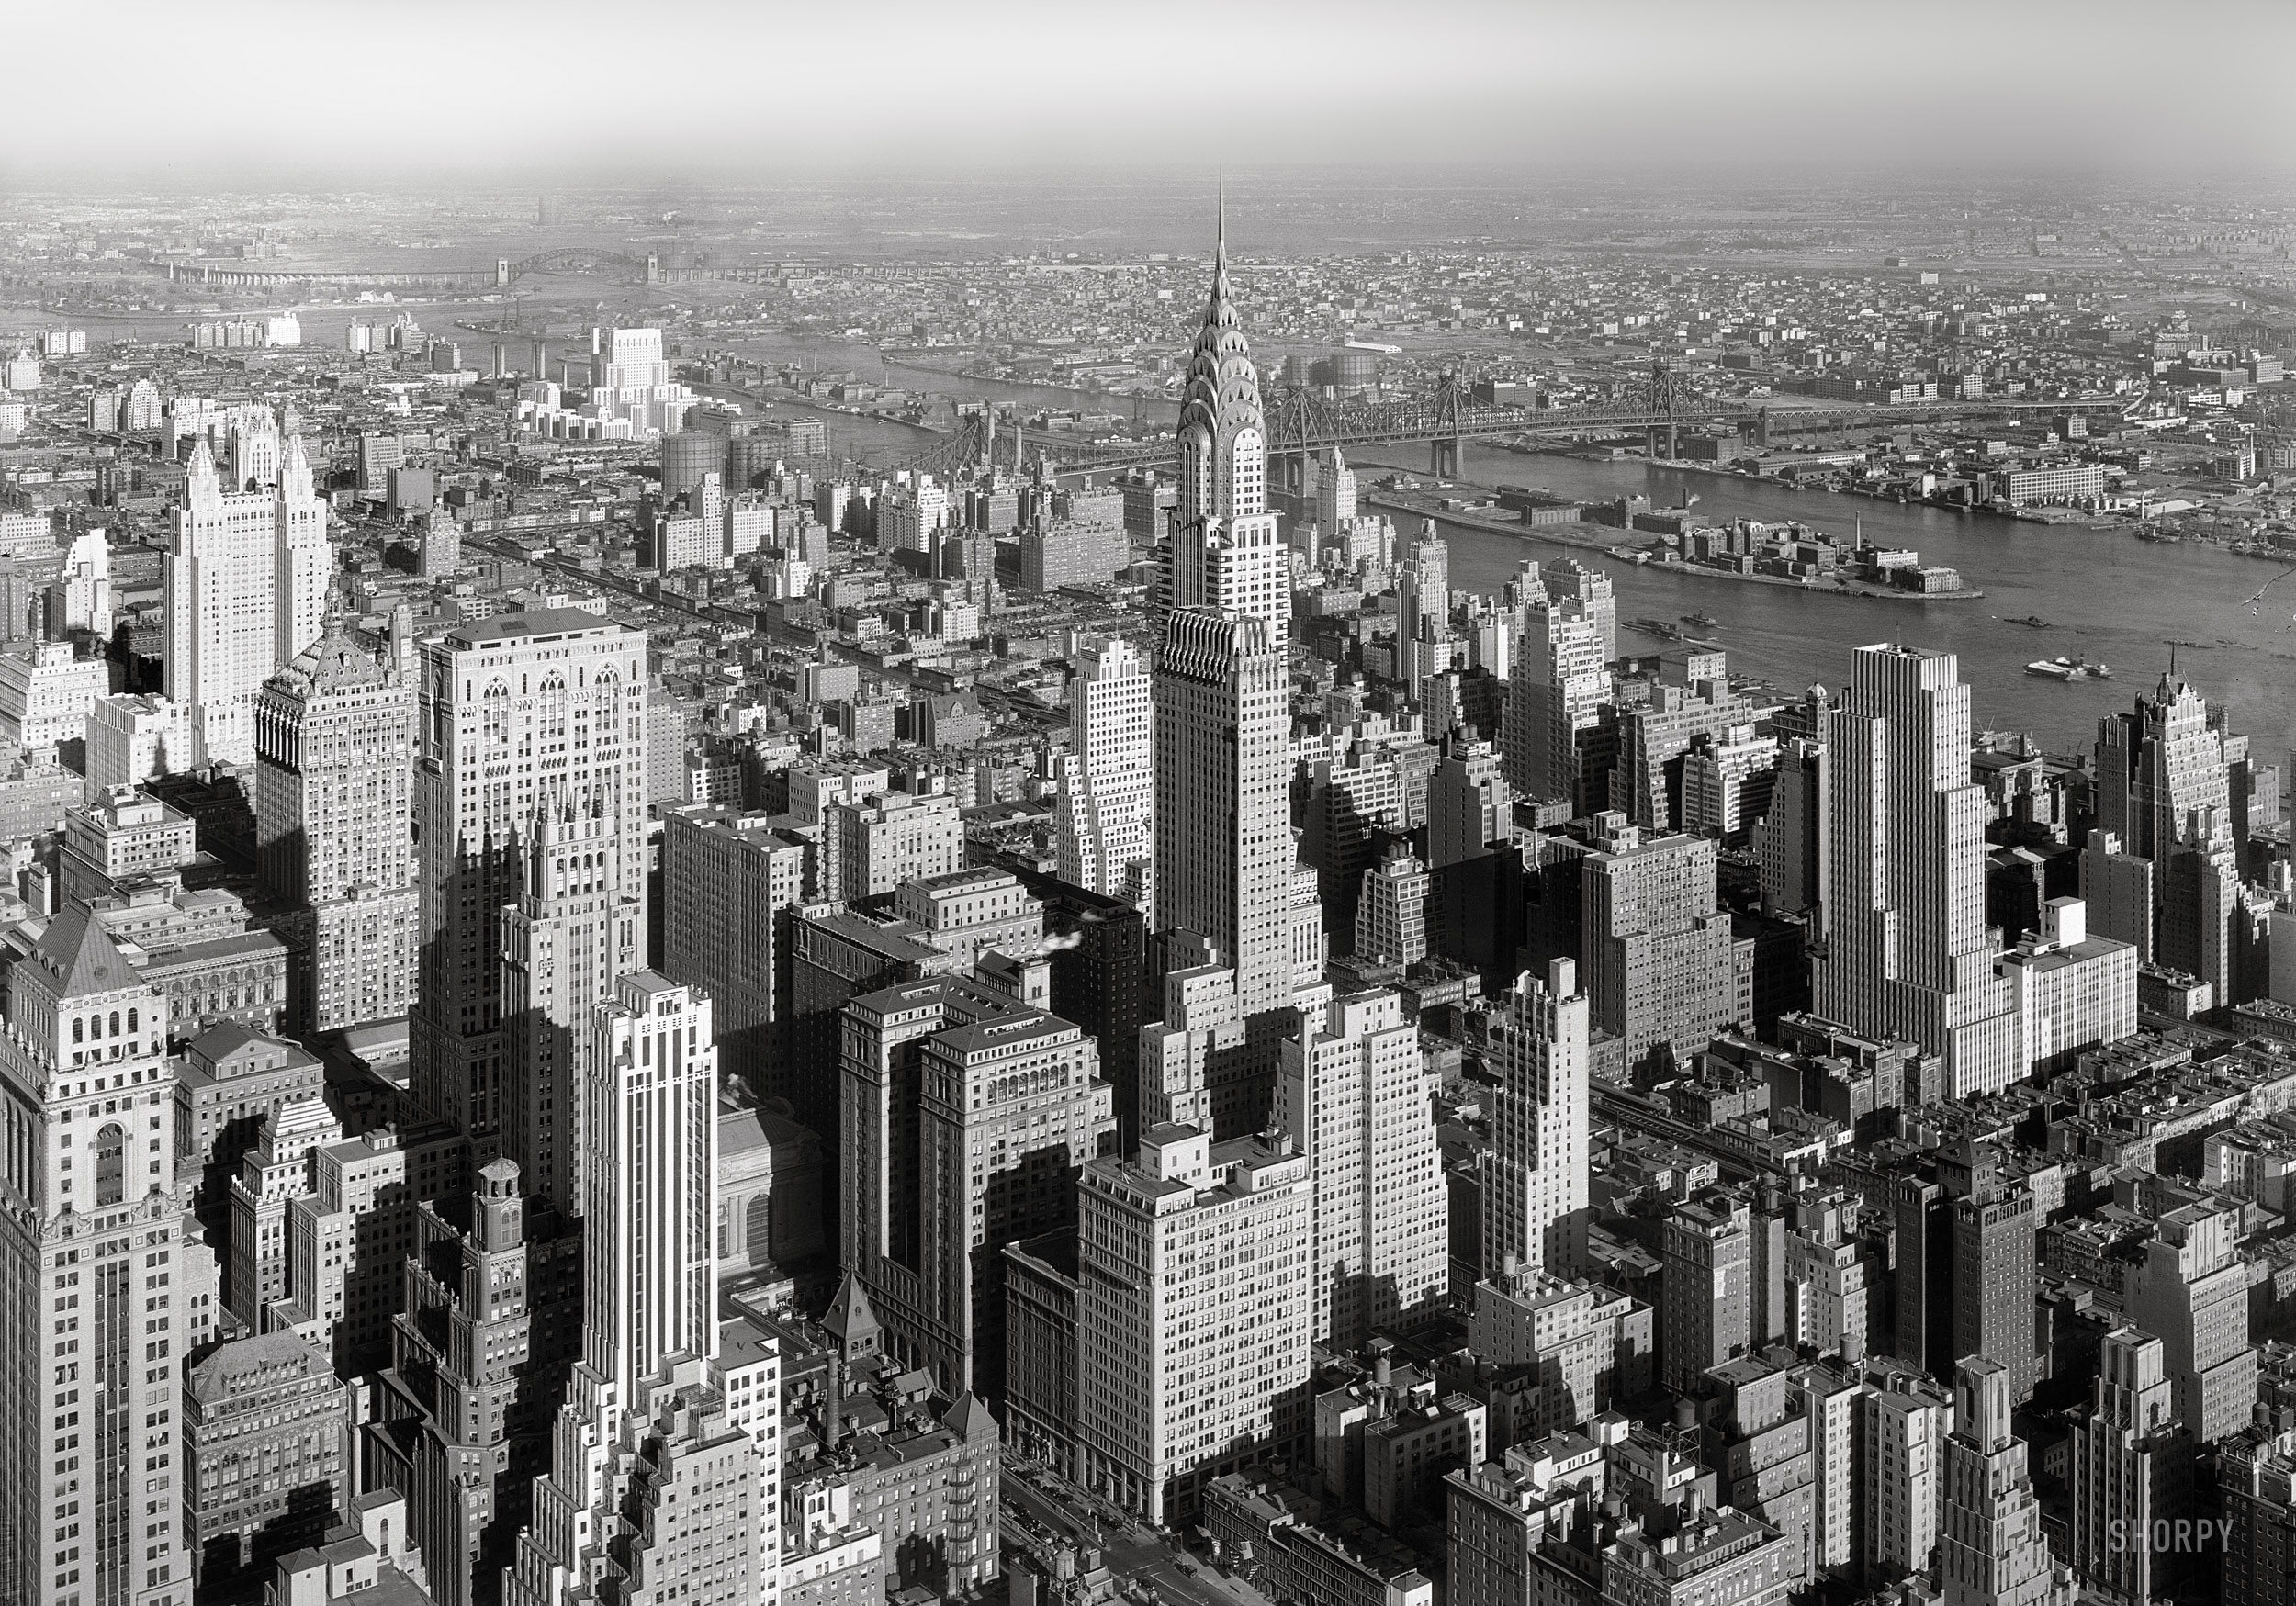 Jan. 19, 1932. "View from Empire State Bldg. to Chrysler Building and Queensboro Bridge, low viewpoint." 5x7 negative by Gottscho-Schleisner. View full size.